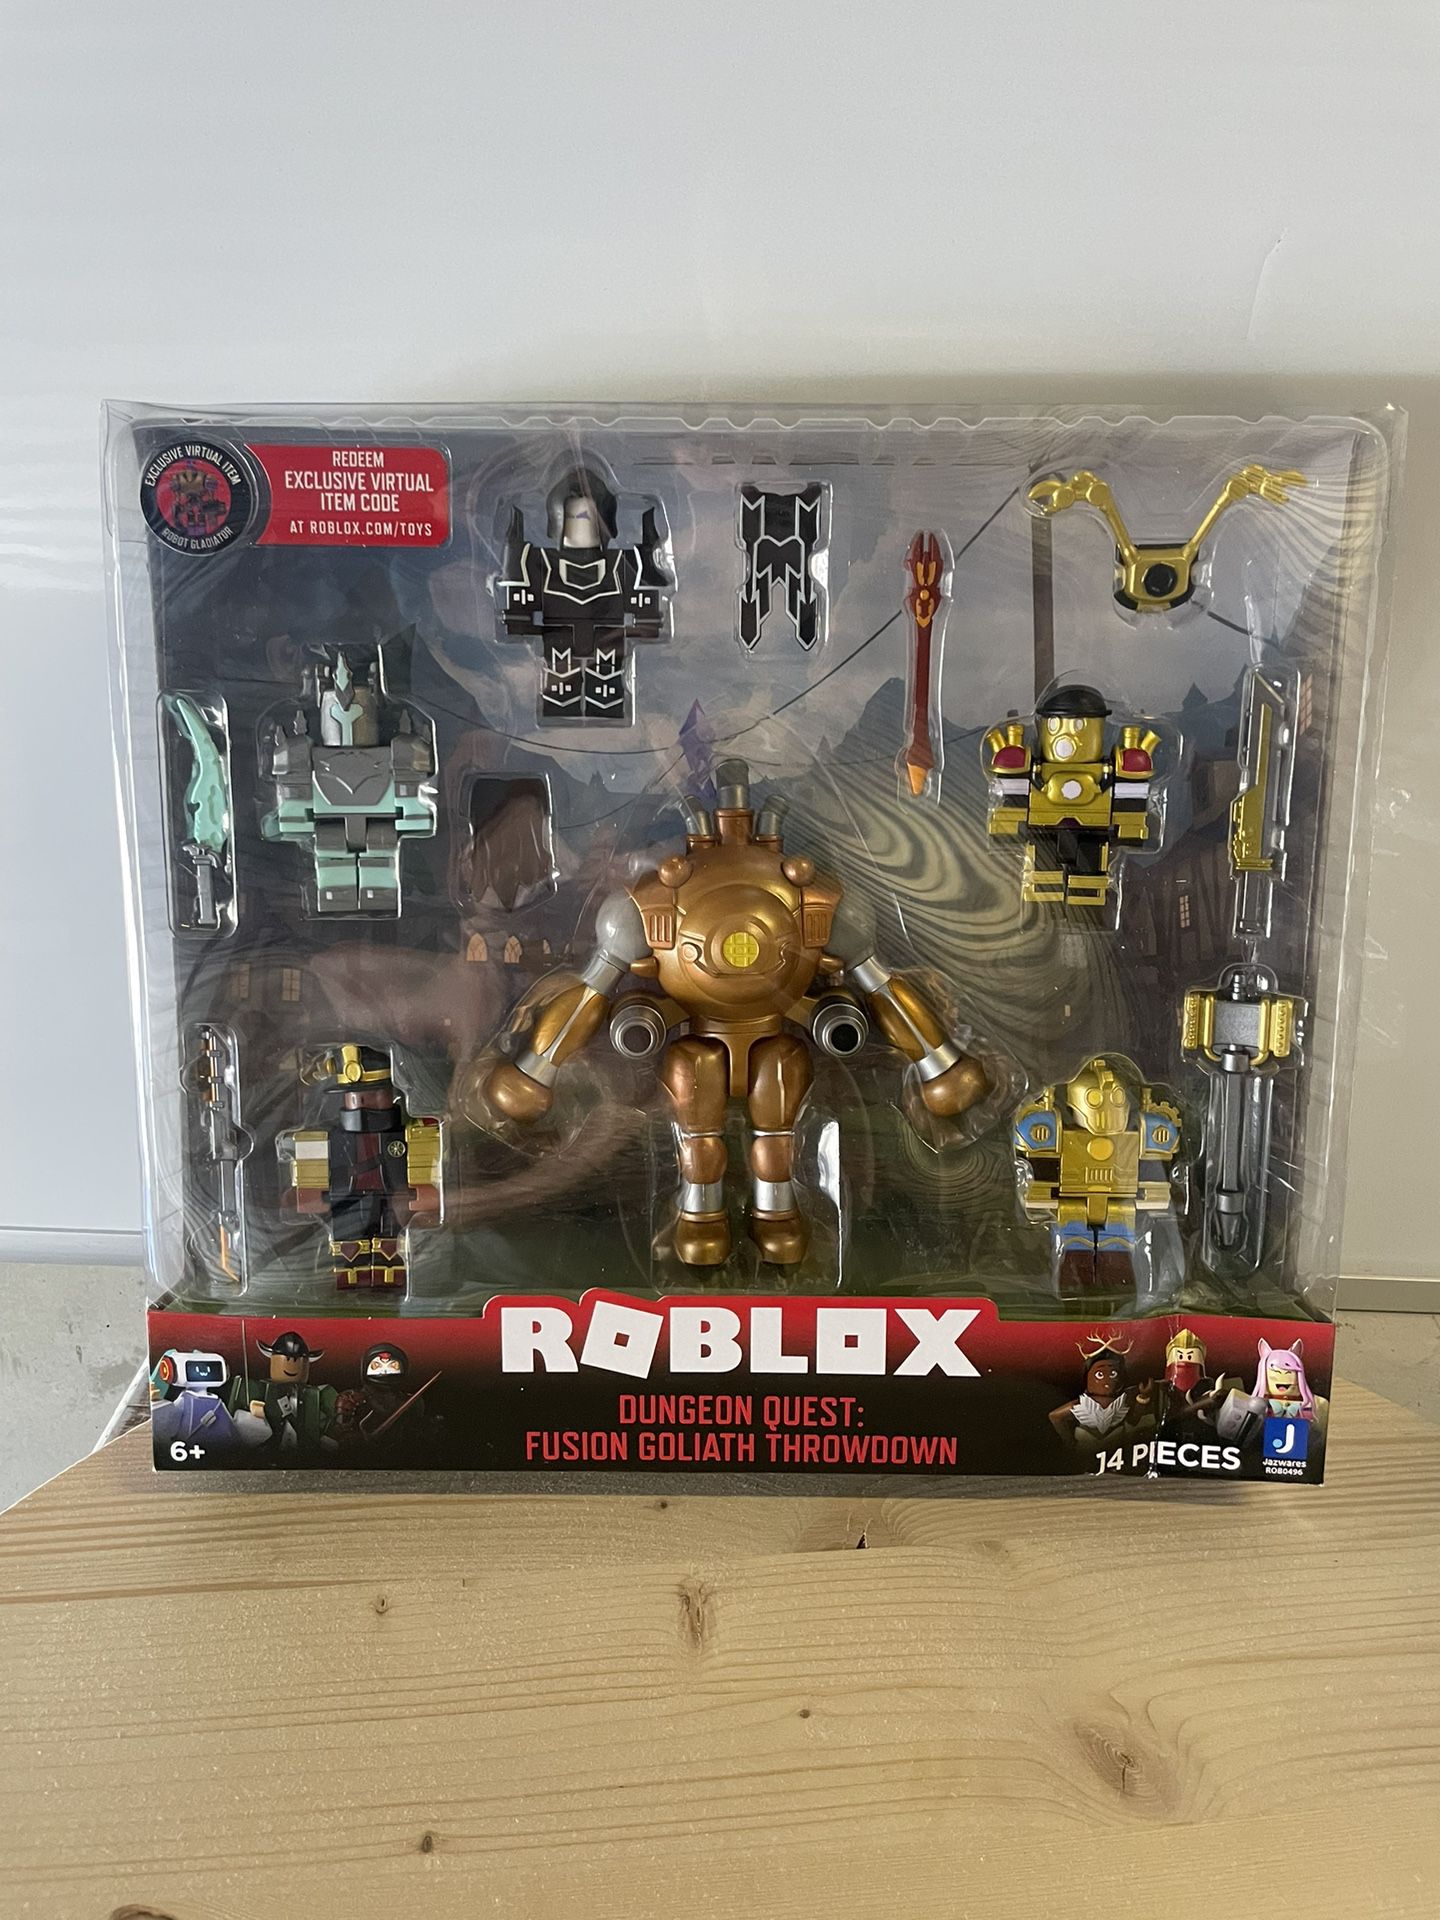 Roblox Dungeon Quest: Fusion Goliath Throwdown With Exclusive Virtual Item  Code